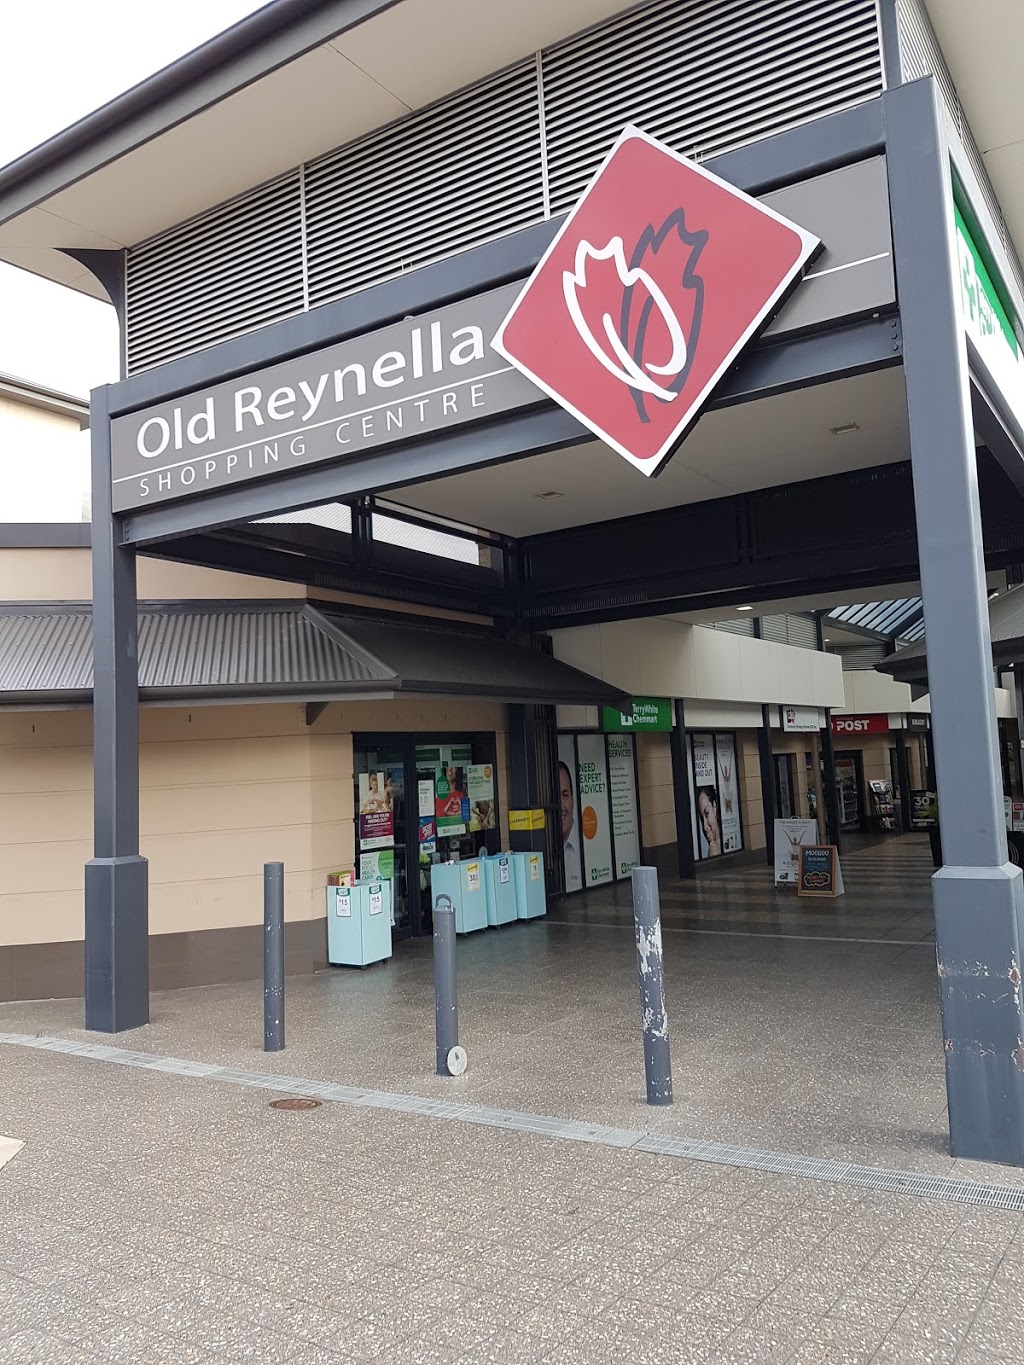 Old Reynella Shopping Centre | shopping mall | 211 Old S Rd, Old Reynella SA 5161, Australia | 0882128880 OR +61 8 8212 8880